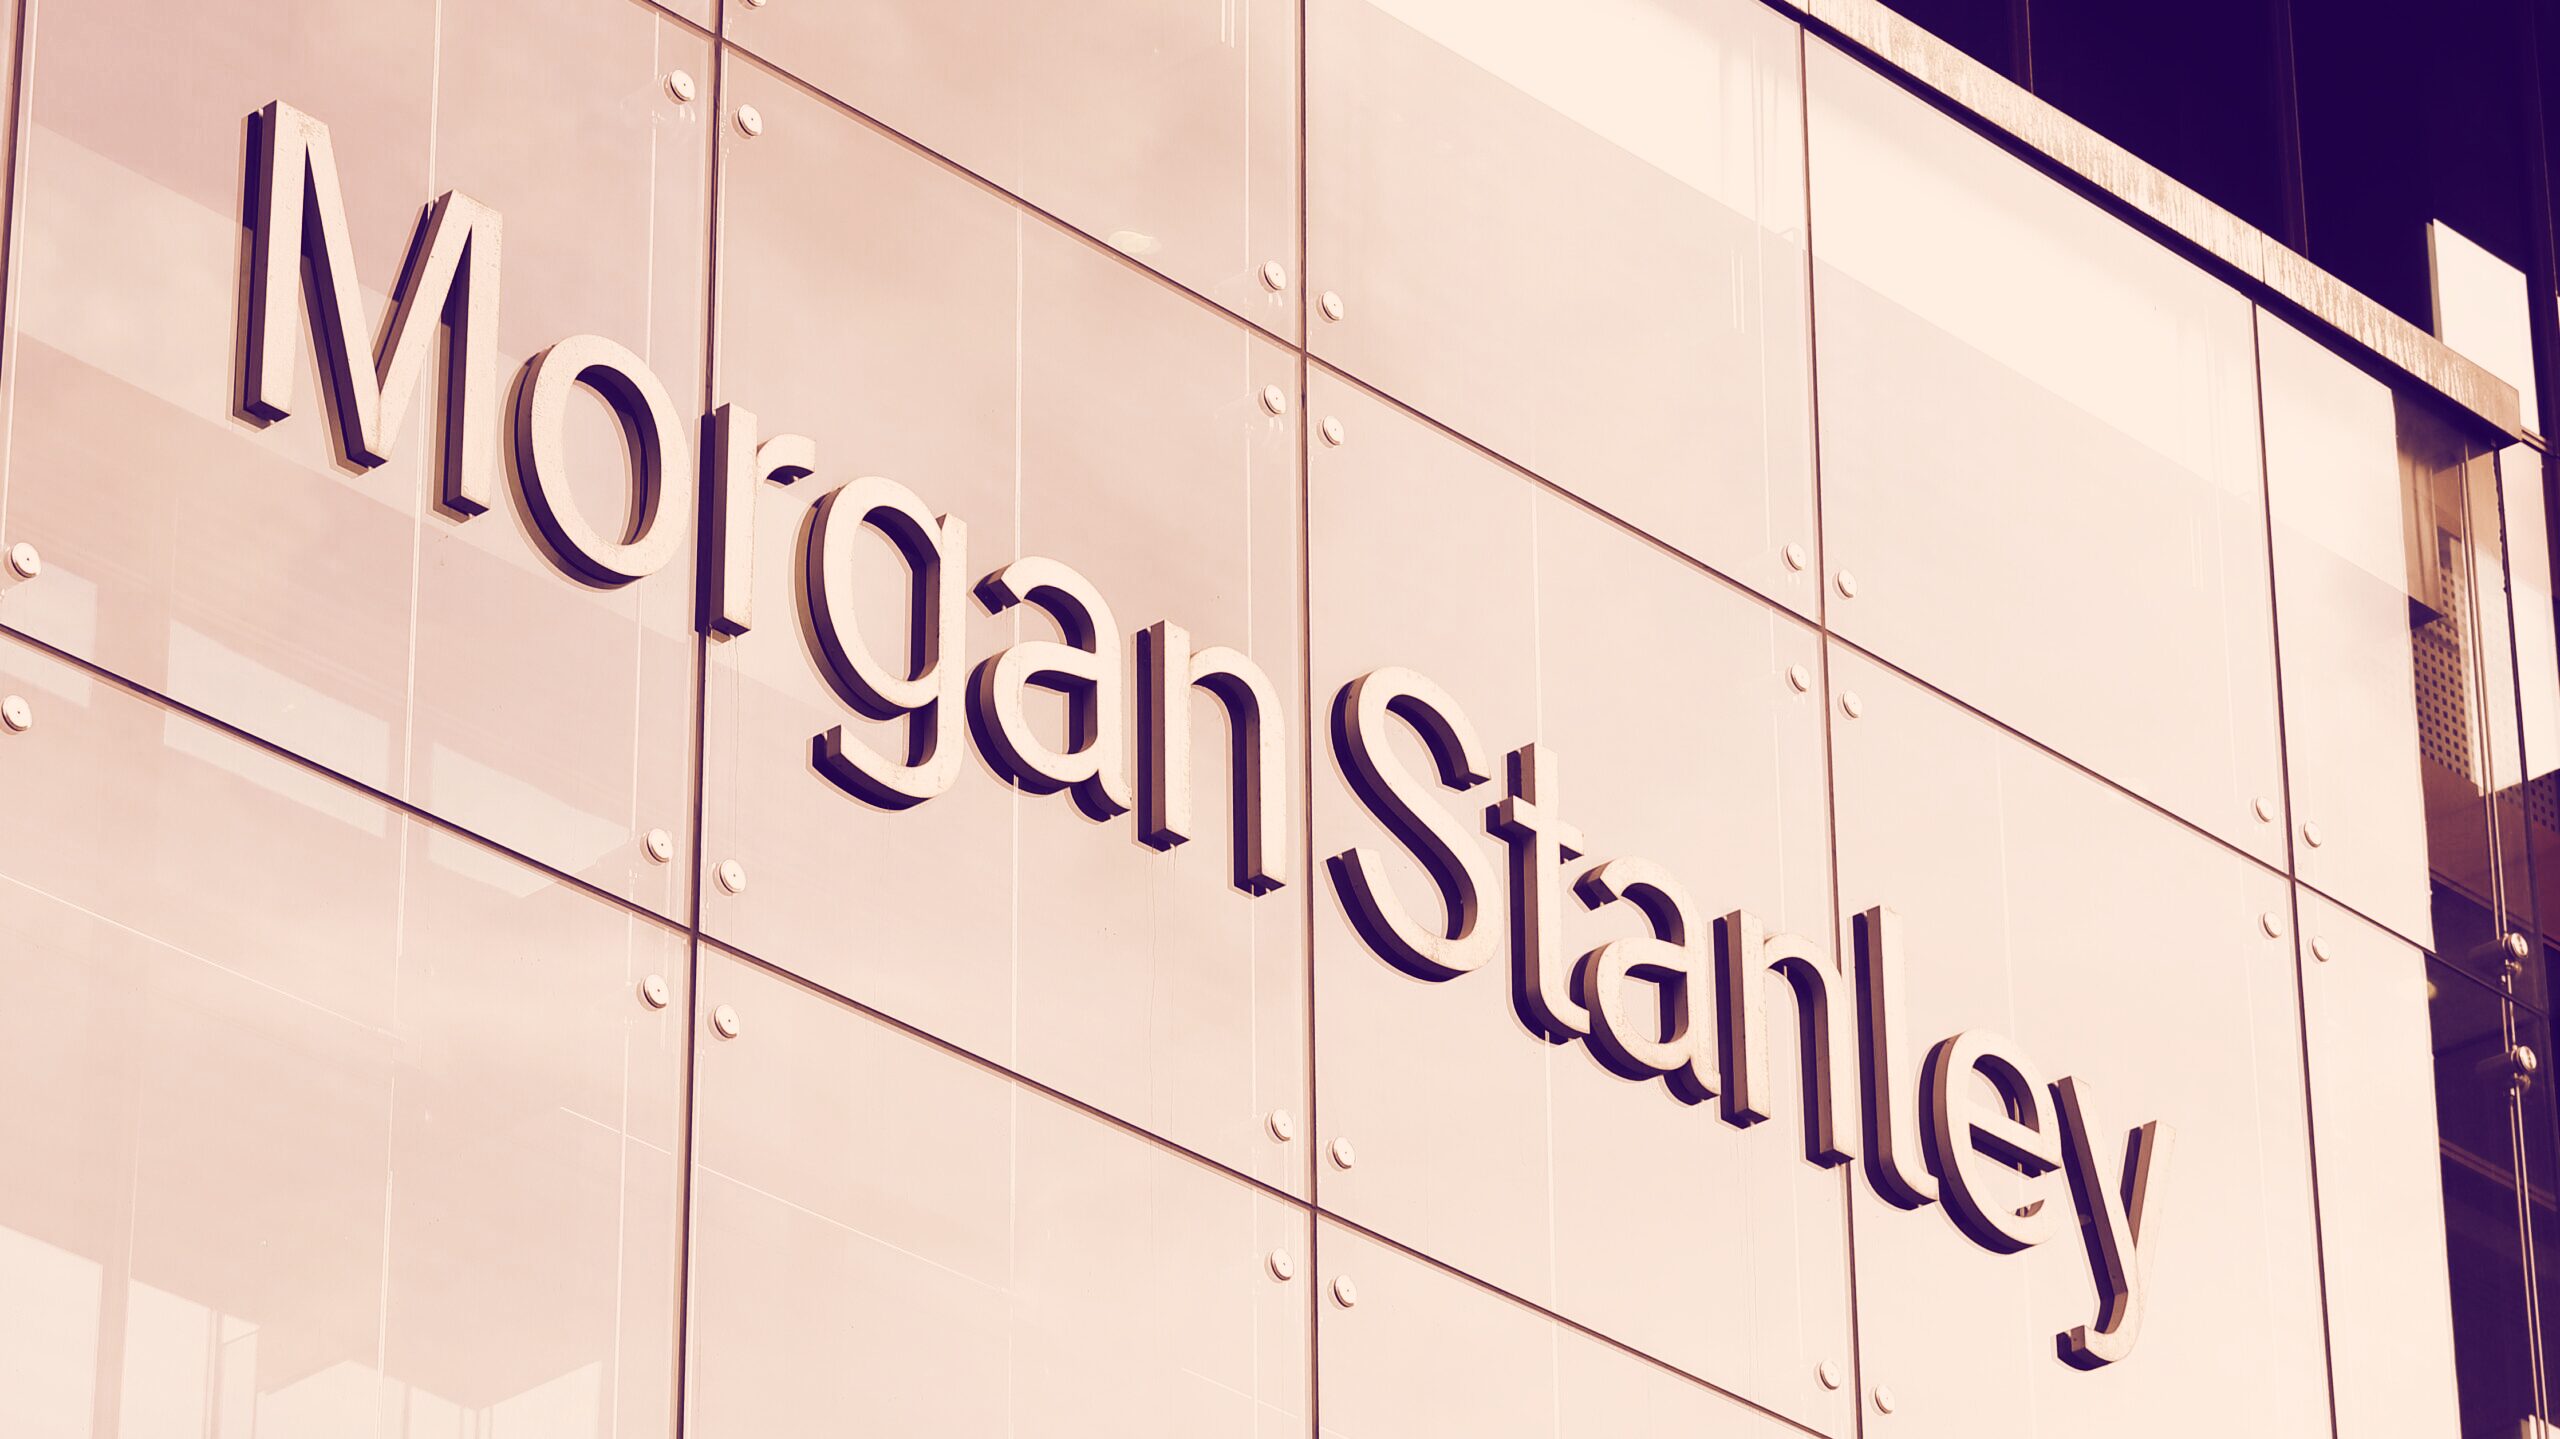 Morgan Stanley increases GBTC investment, but cheaper ETFs could compete